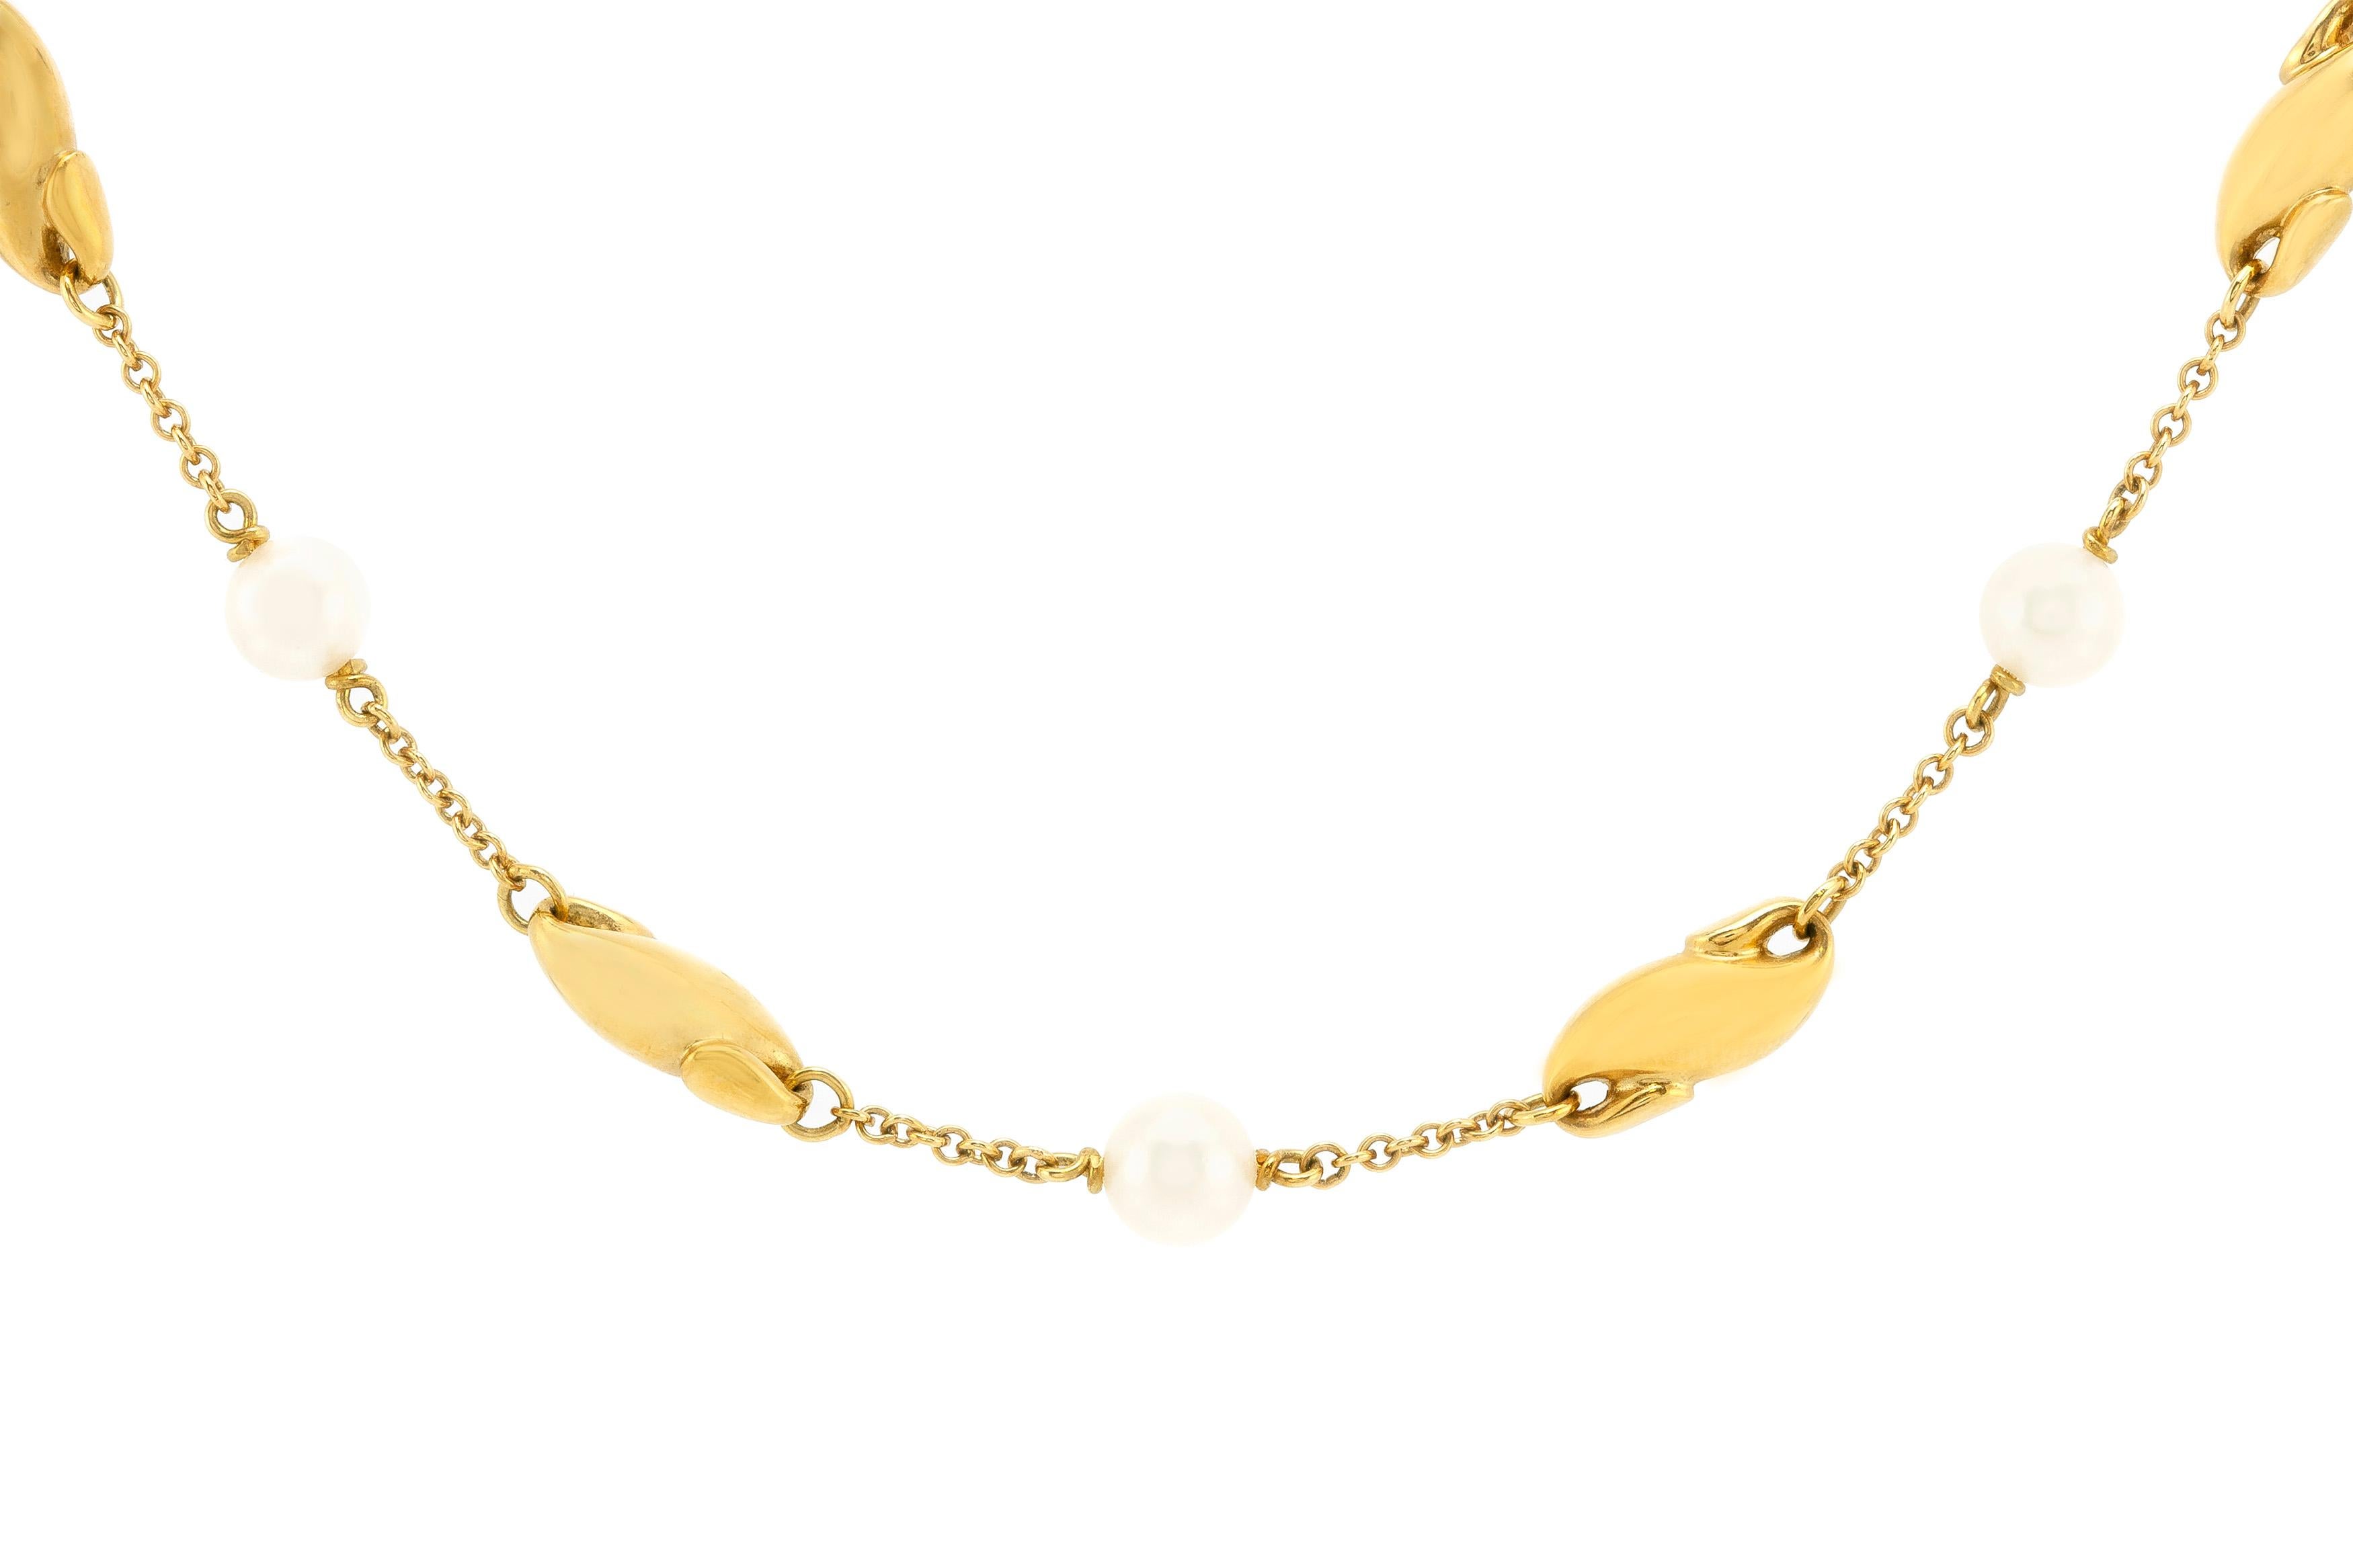 Tiffany necklace is finely crafted in 18K gold with pearls